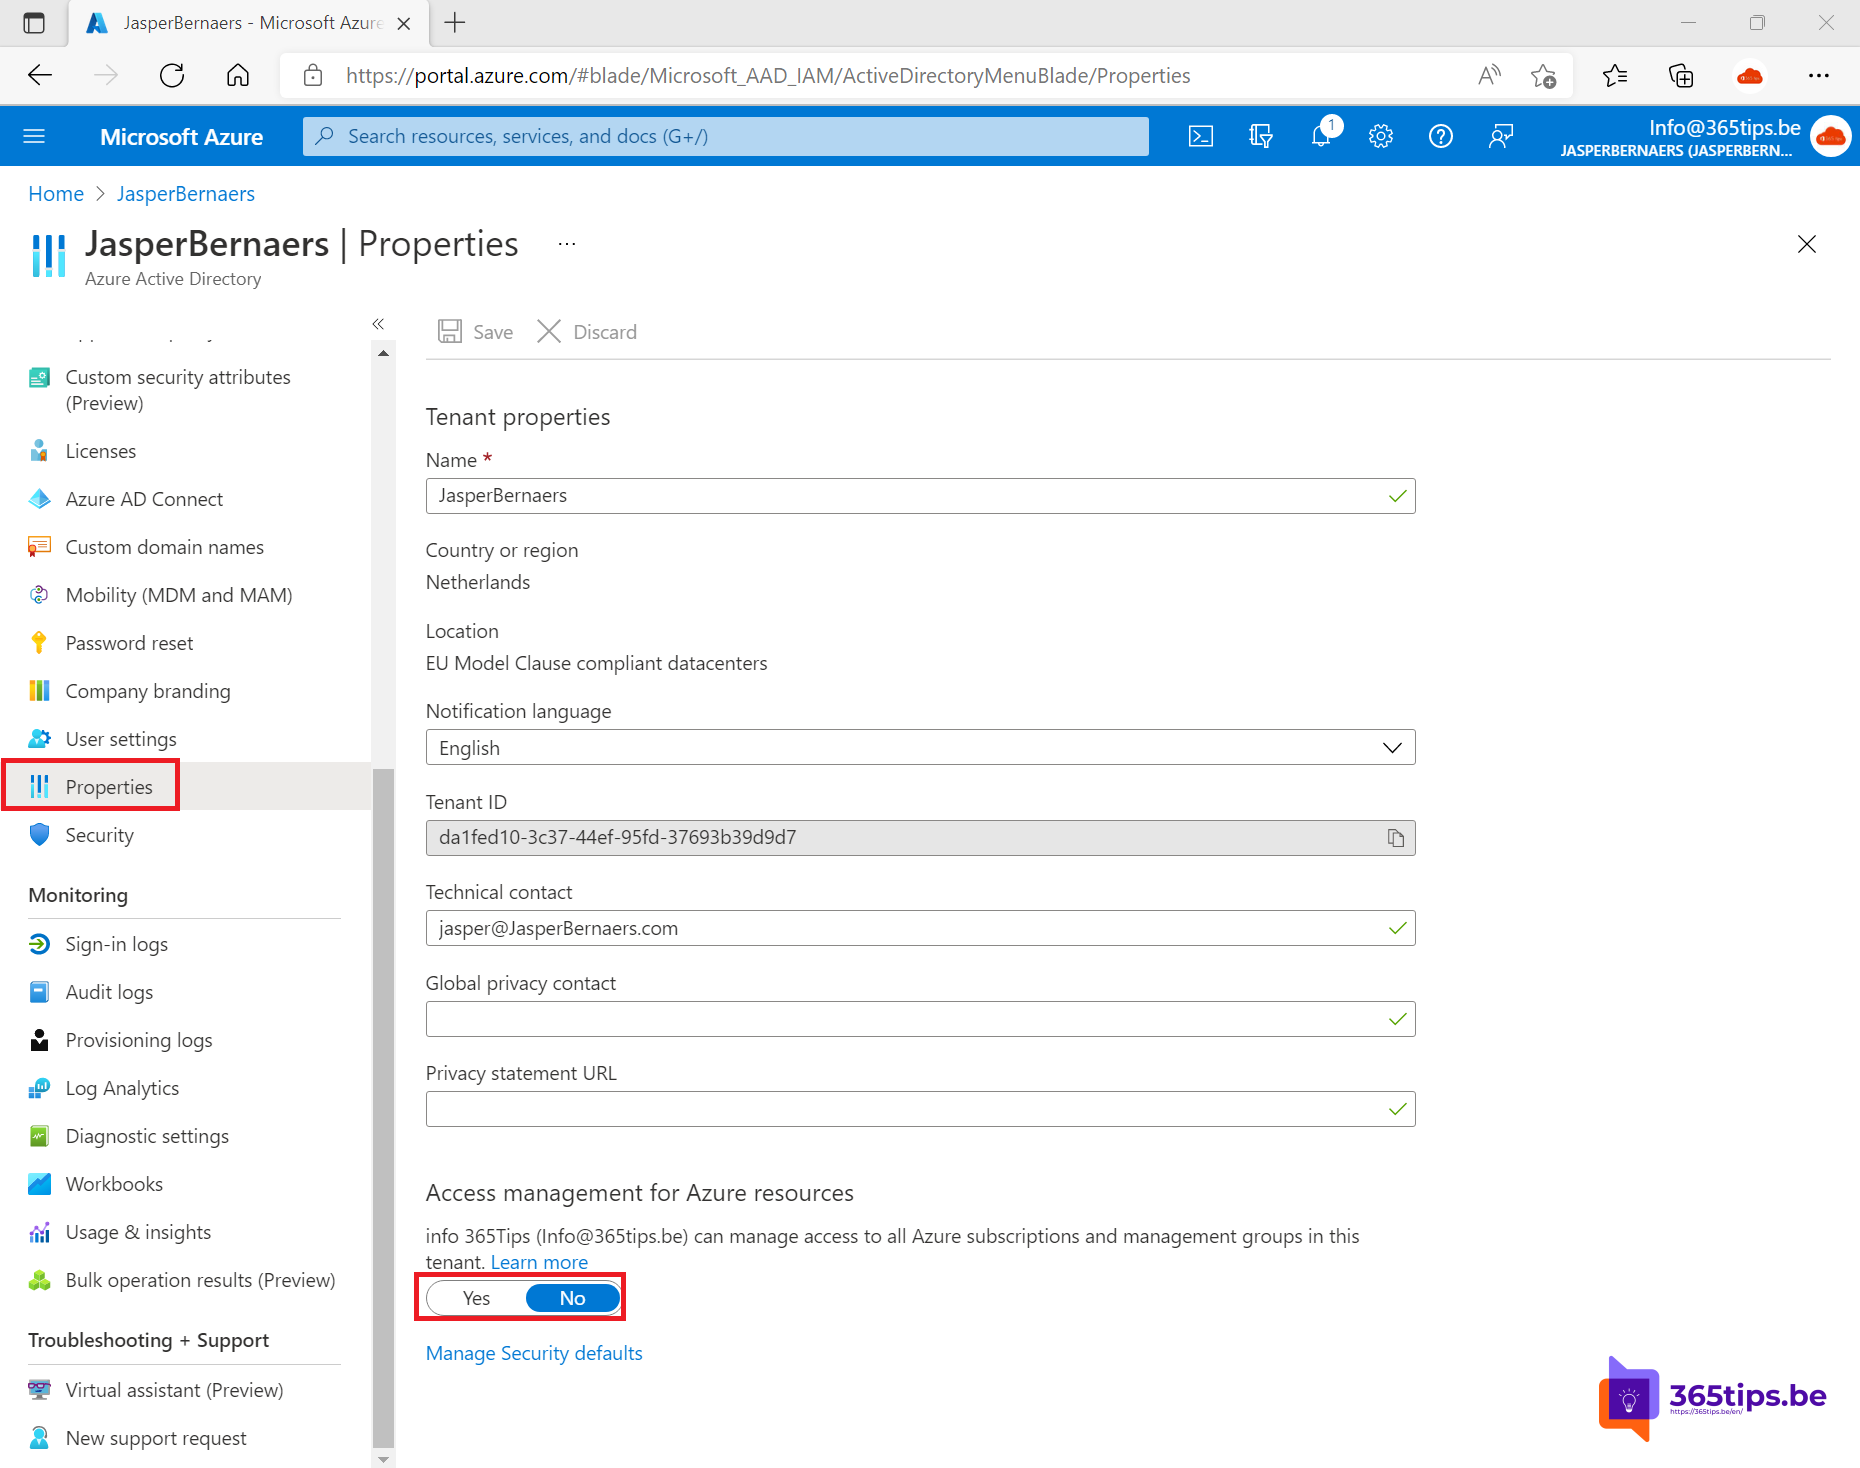 How to take control of an Azure Subscription without being an administrator